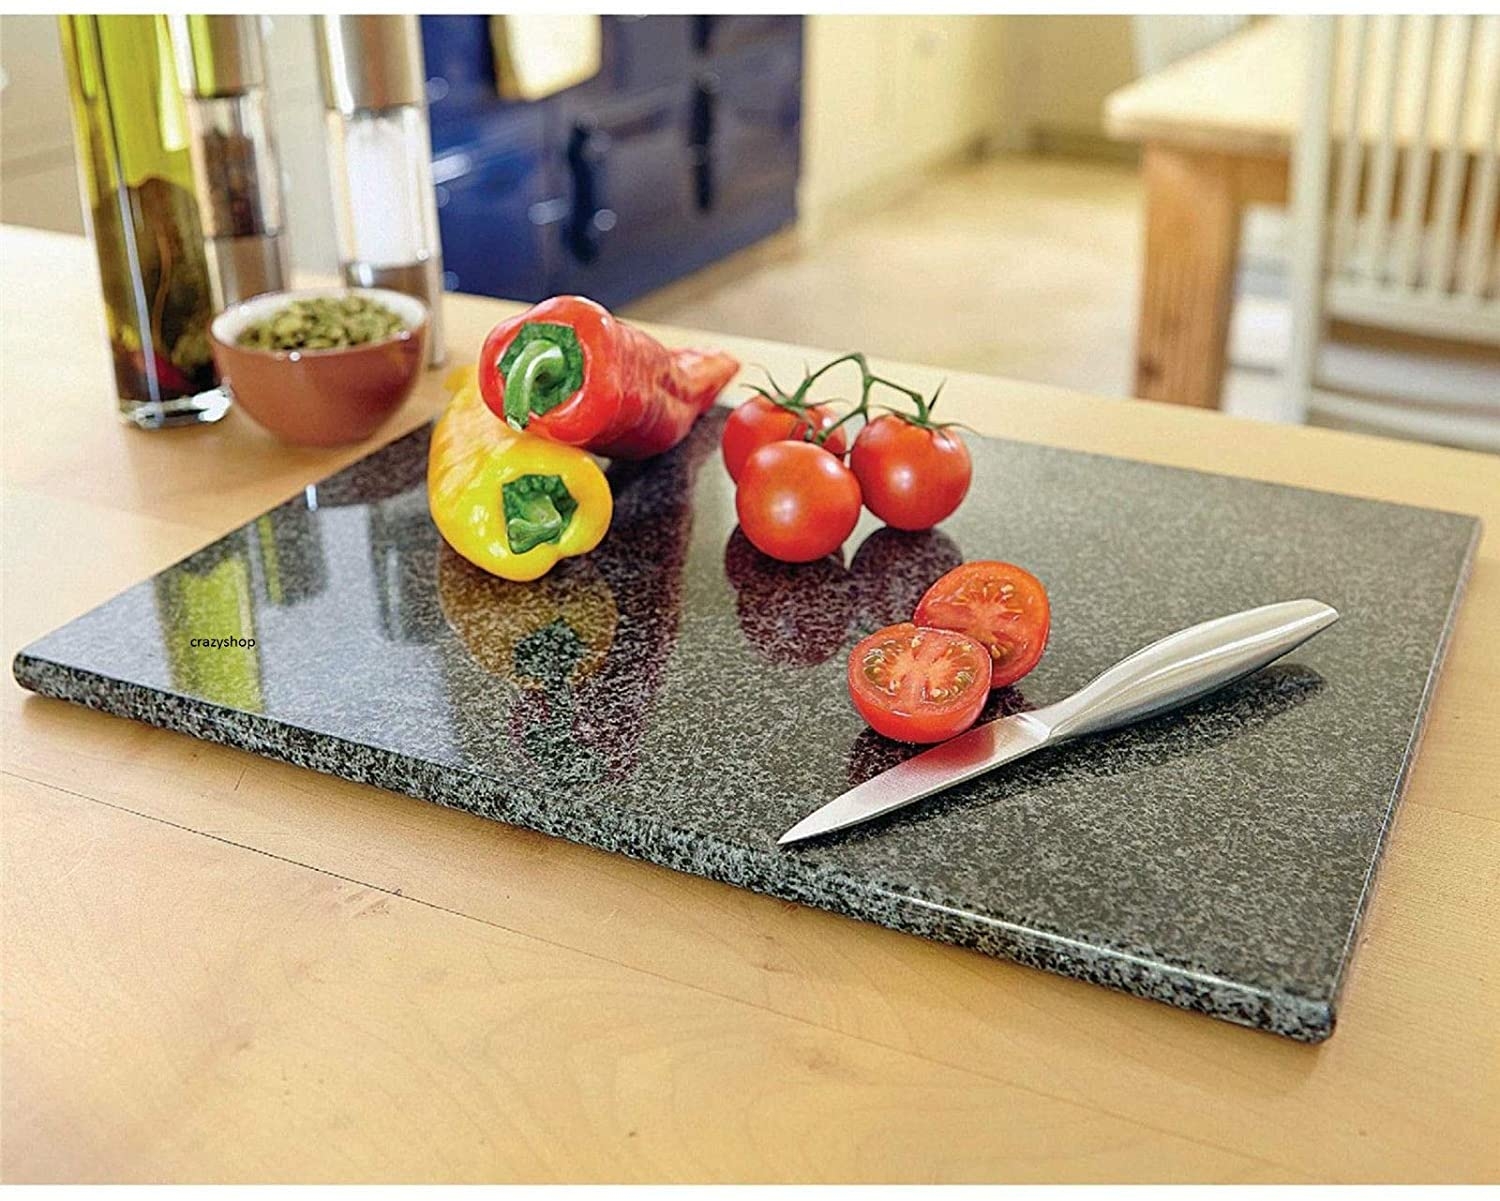 can you use granite as a cutting board